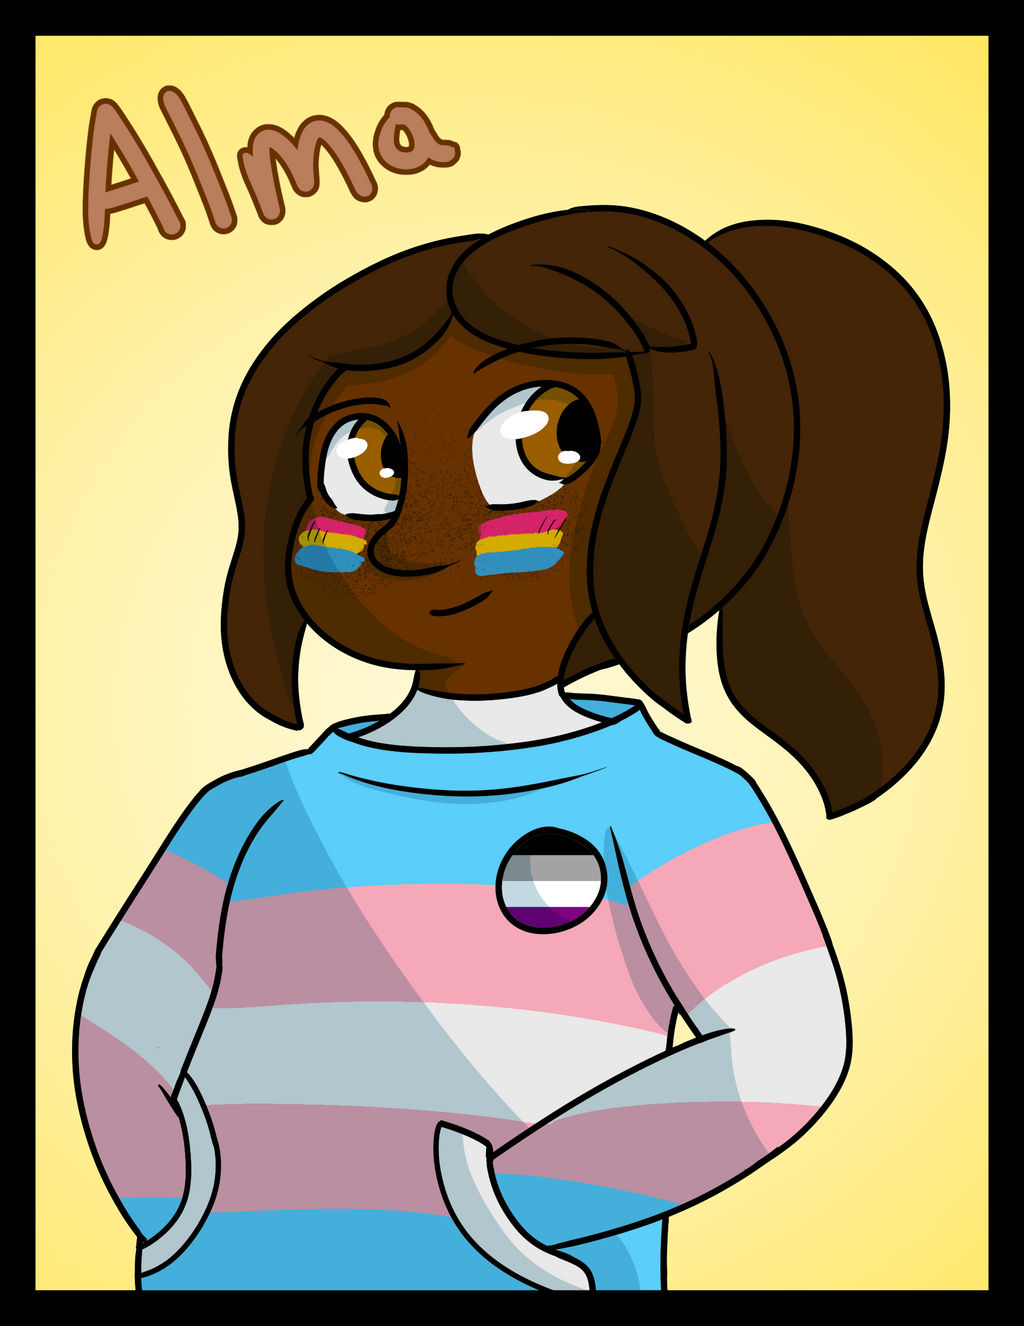 alma_pride__22_by_tailsimp_df7a6ad-fullview.jpg